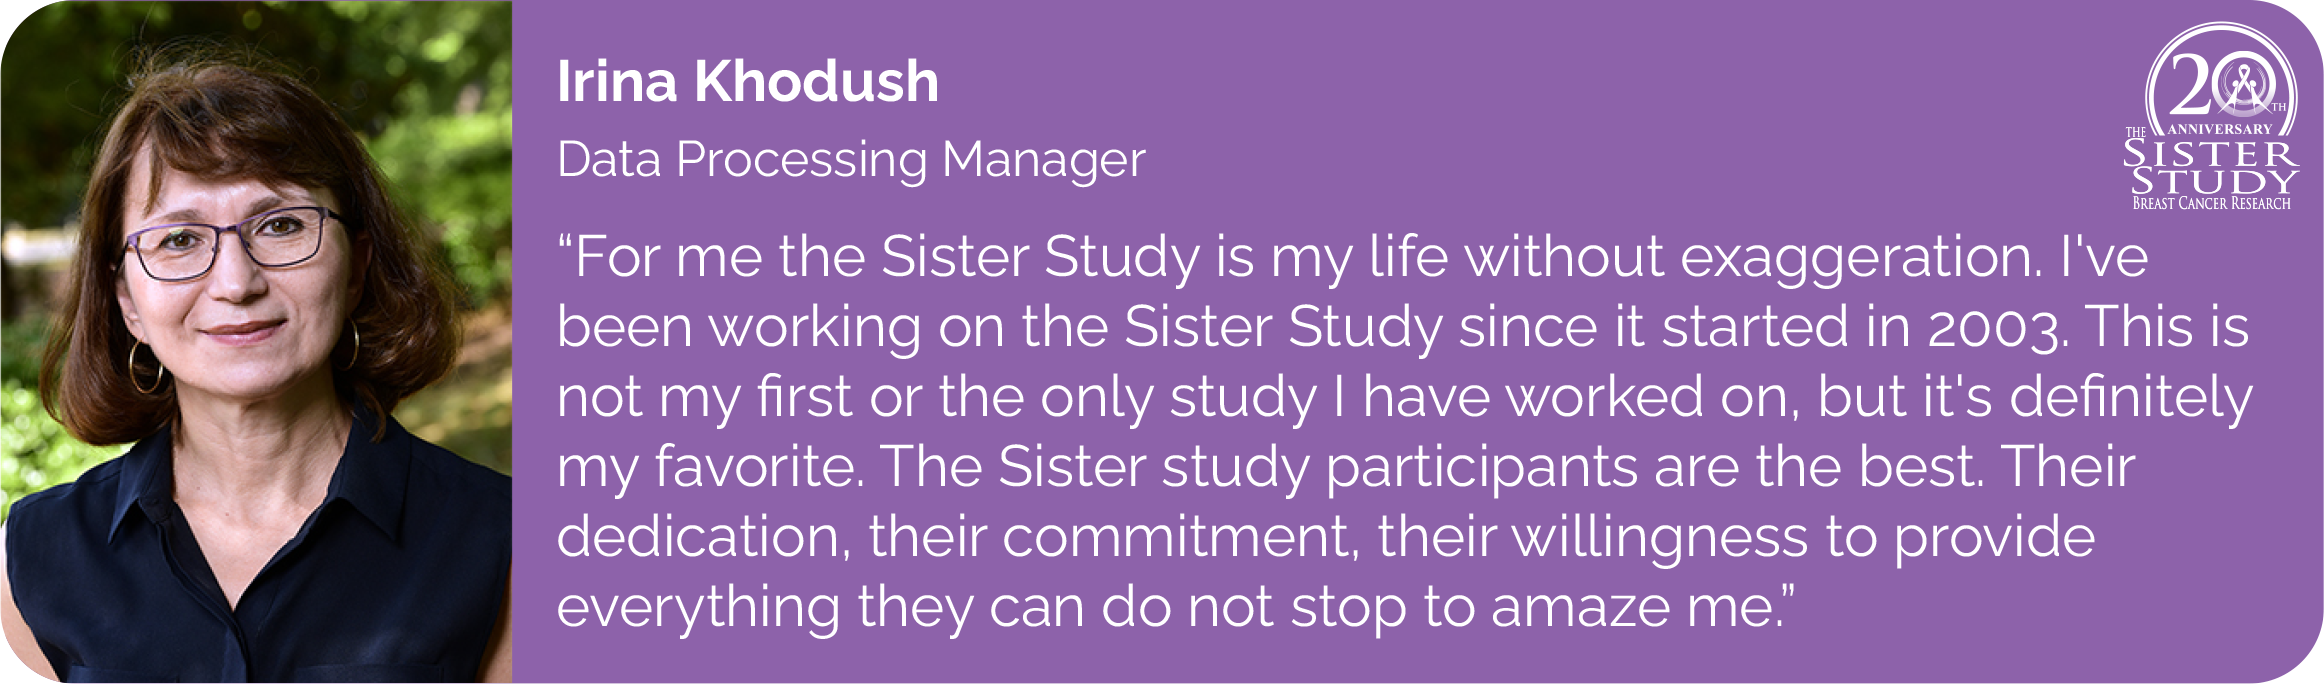 Irina Khodush
Data Processing Manager
- For me the Sister study is my life without exaggeration. I've
been working on the Sister study since it started in 2003. This is
not my first or the only study I have worked on, but it's definitely
my favorite. The Sister study participants are the best. Their
dedication, their commitment, their willingness to provide
everything they can do not stop to amaze me.